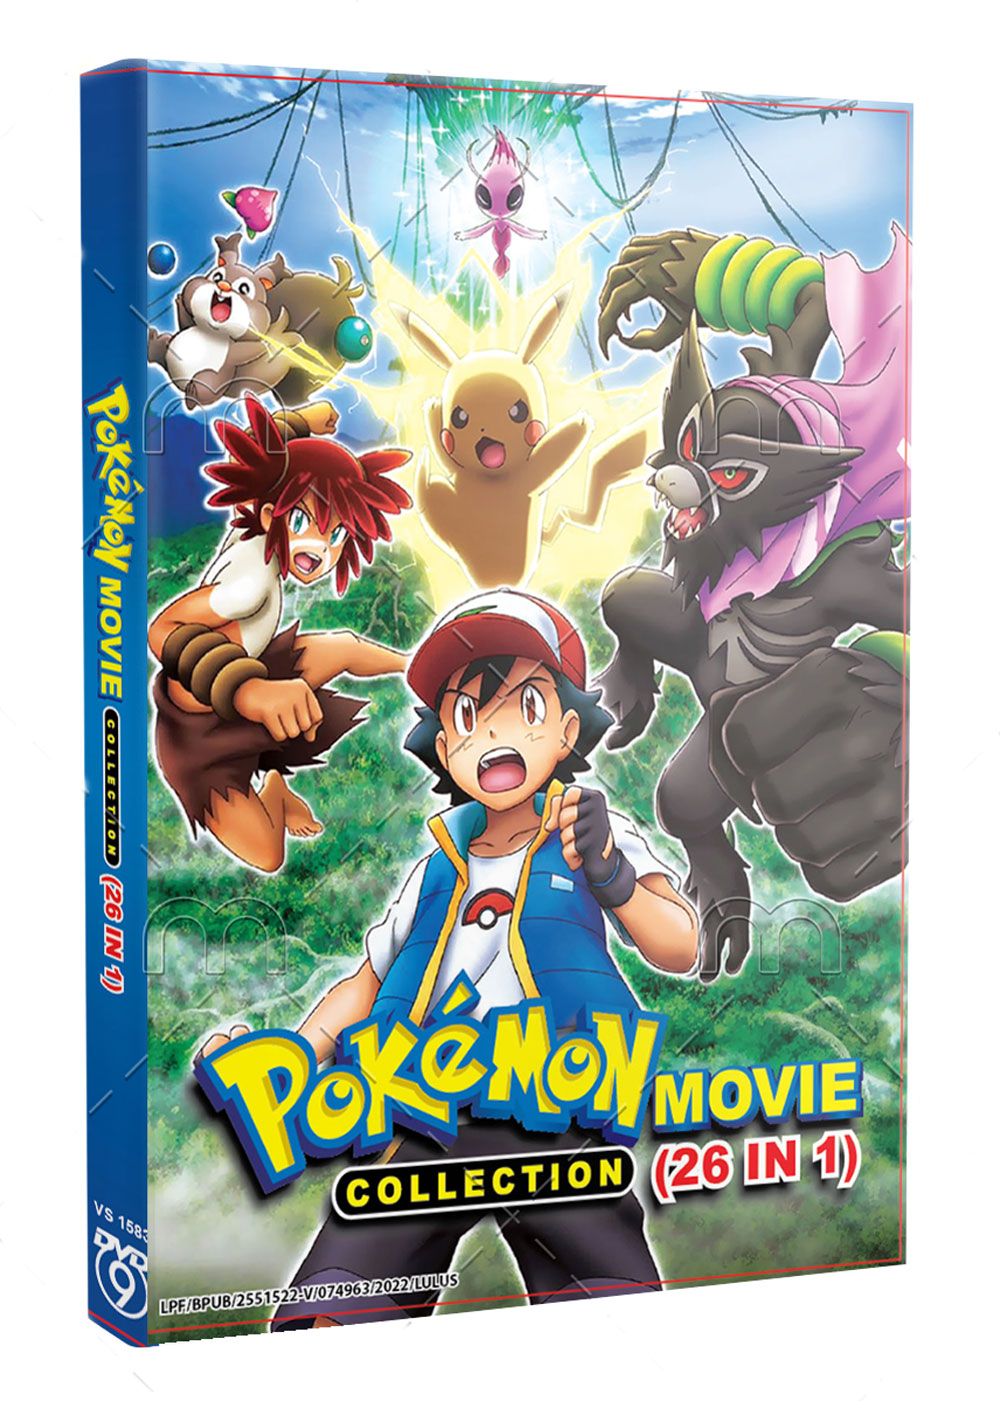 Pokemon Movie Collection (26 IN 1) (DVD) (1998-2019) Anime